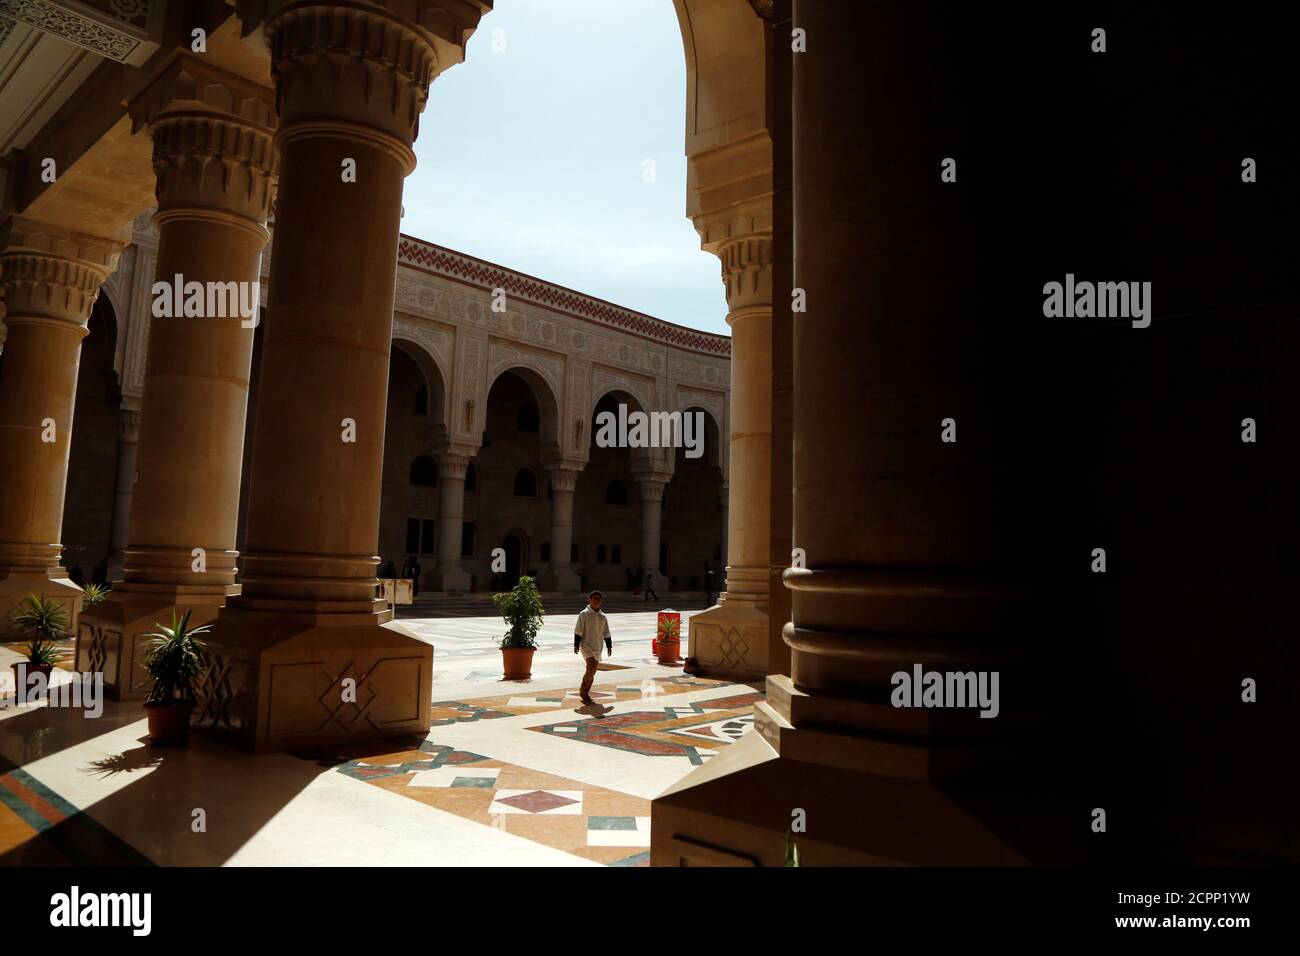 Sanaa, Yemen. 19th Sep, 2020. People are seen at the yard of Al Saleh Mosque in Sanaa, Yemen, Sept. 19, 2020. Credit: Mohammed Mohammed/Xinhua/Alamy Live News Stock Photo